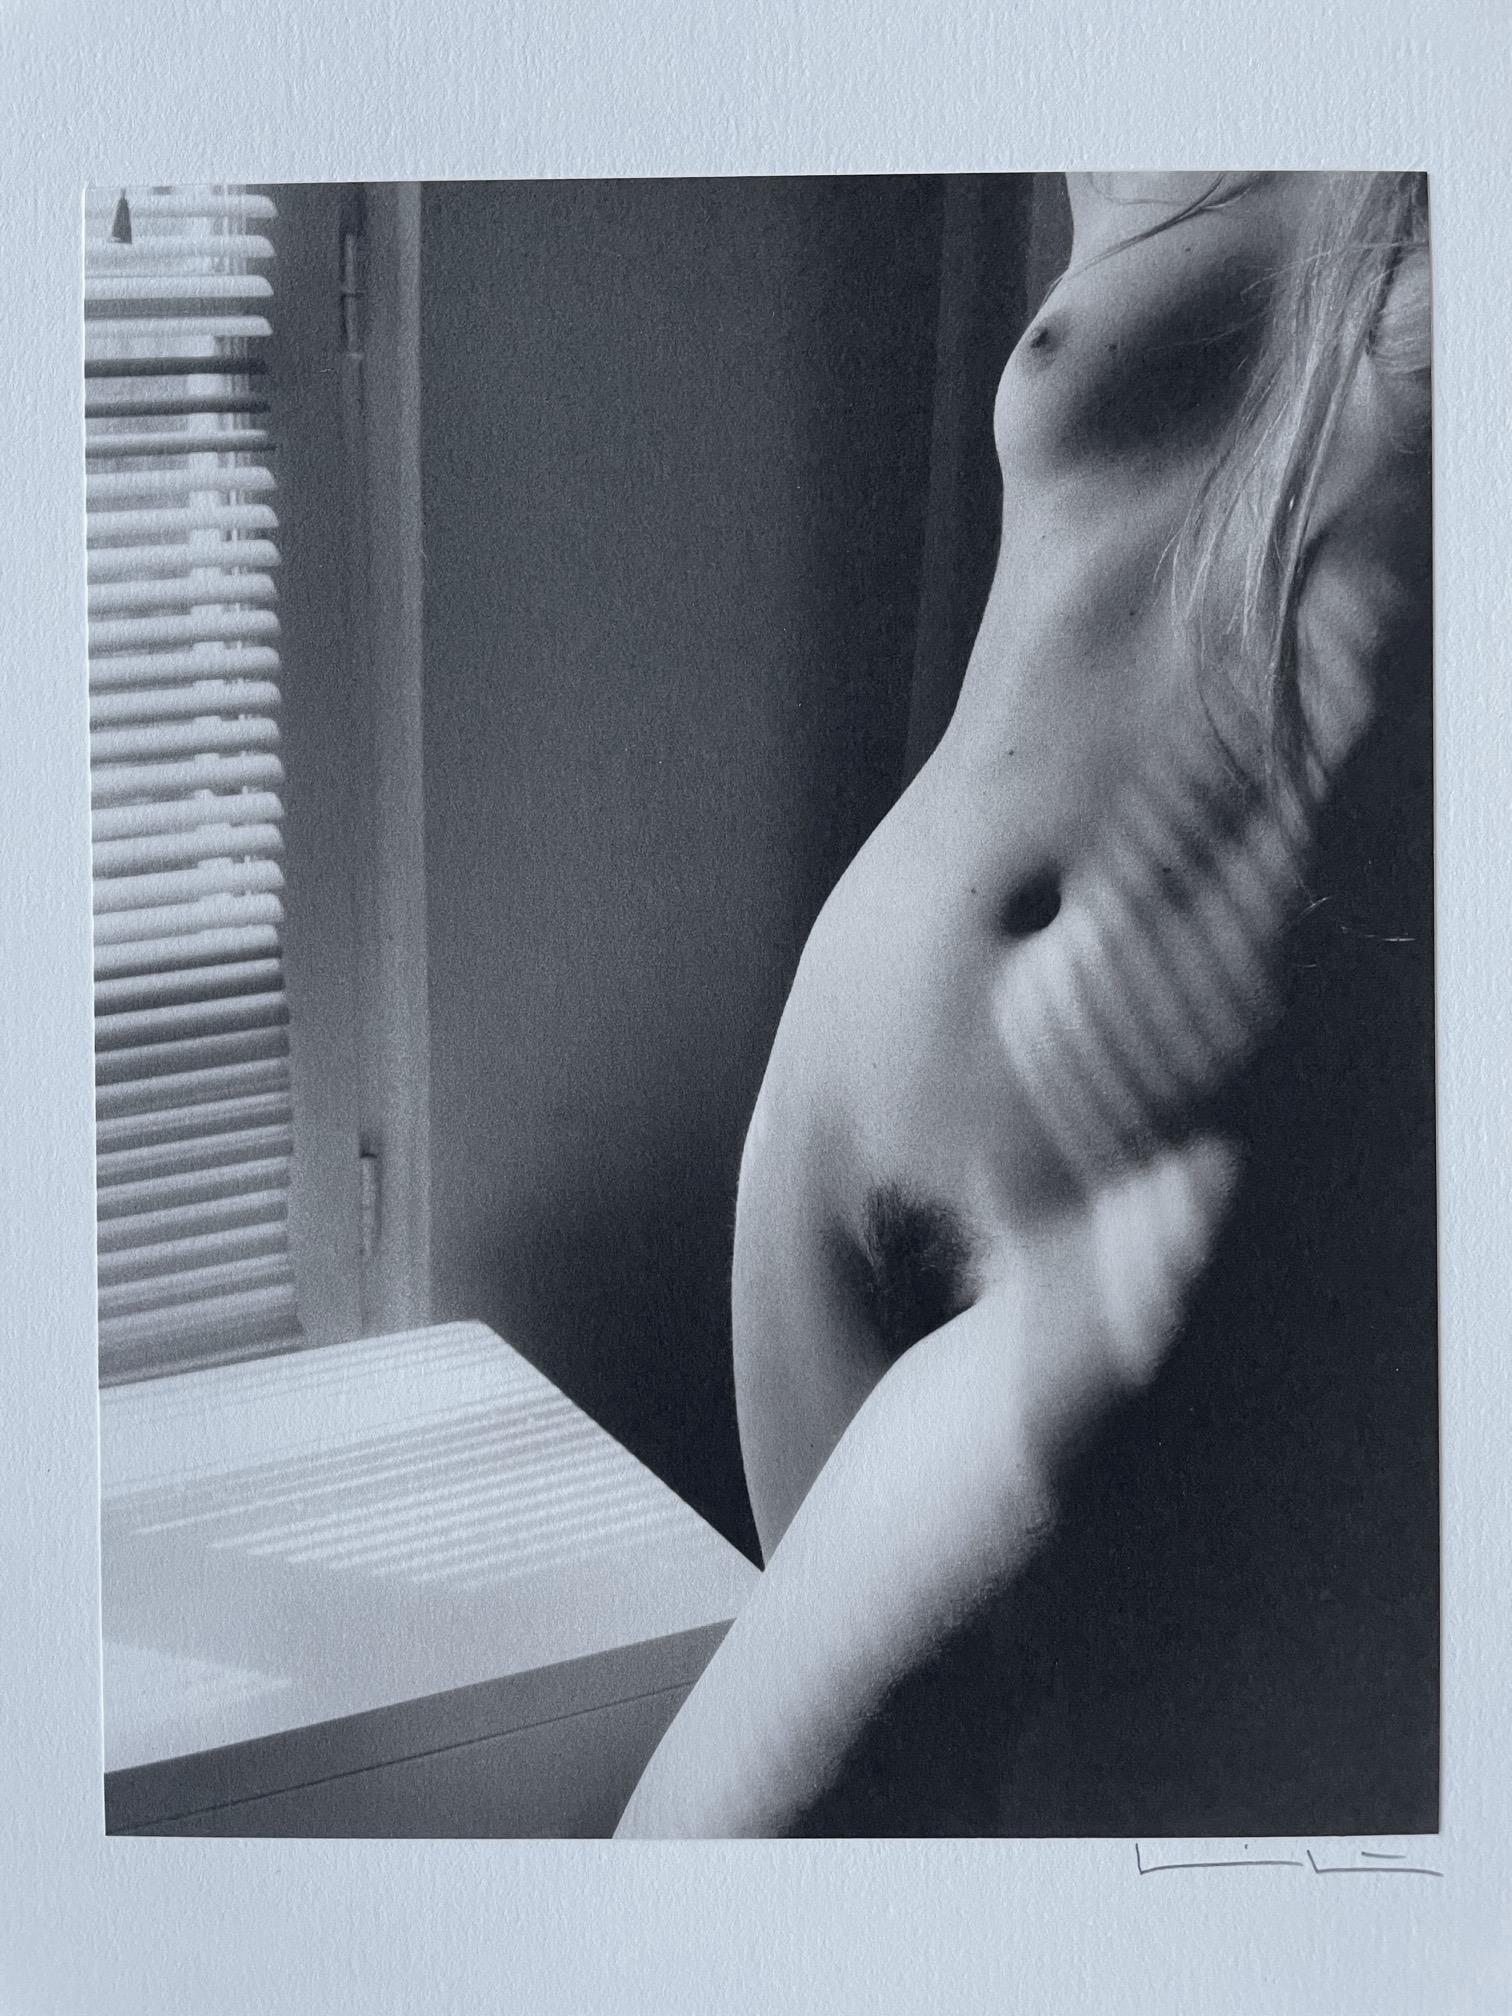 Kim Weston Black and White Photograph - Phoenix Nude 4, Torso With Blinds